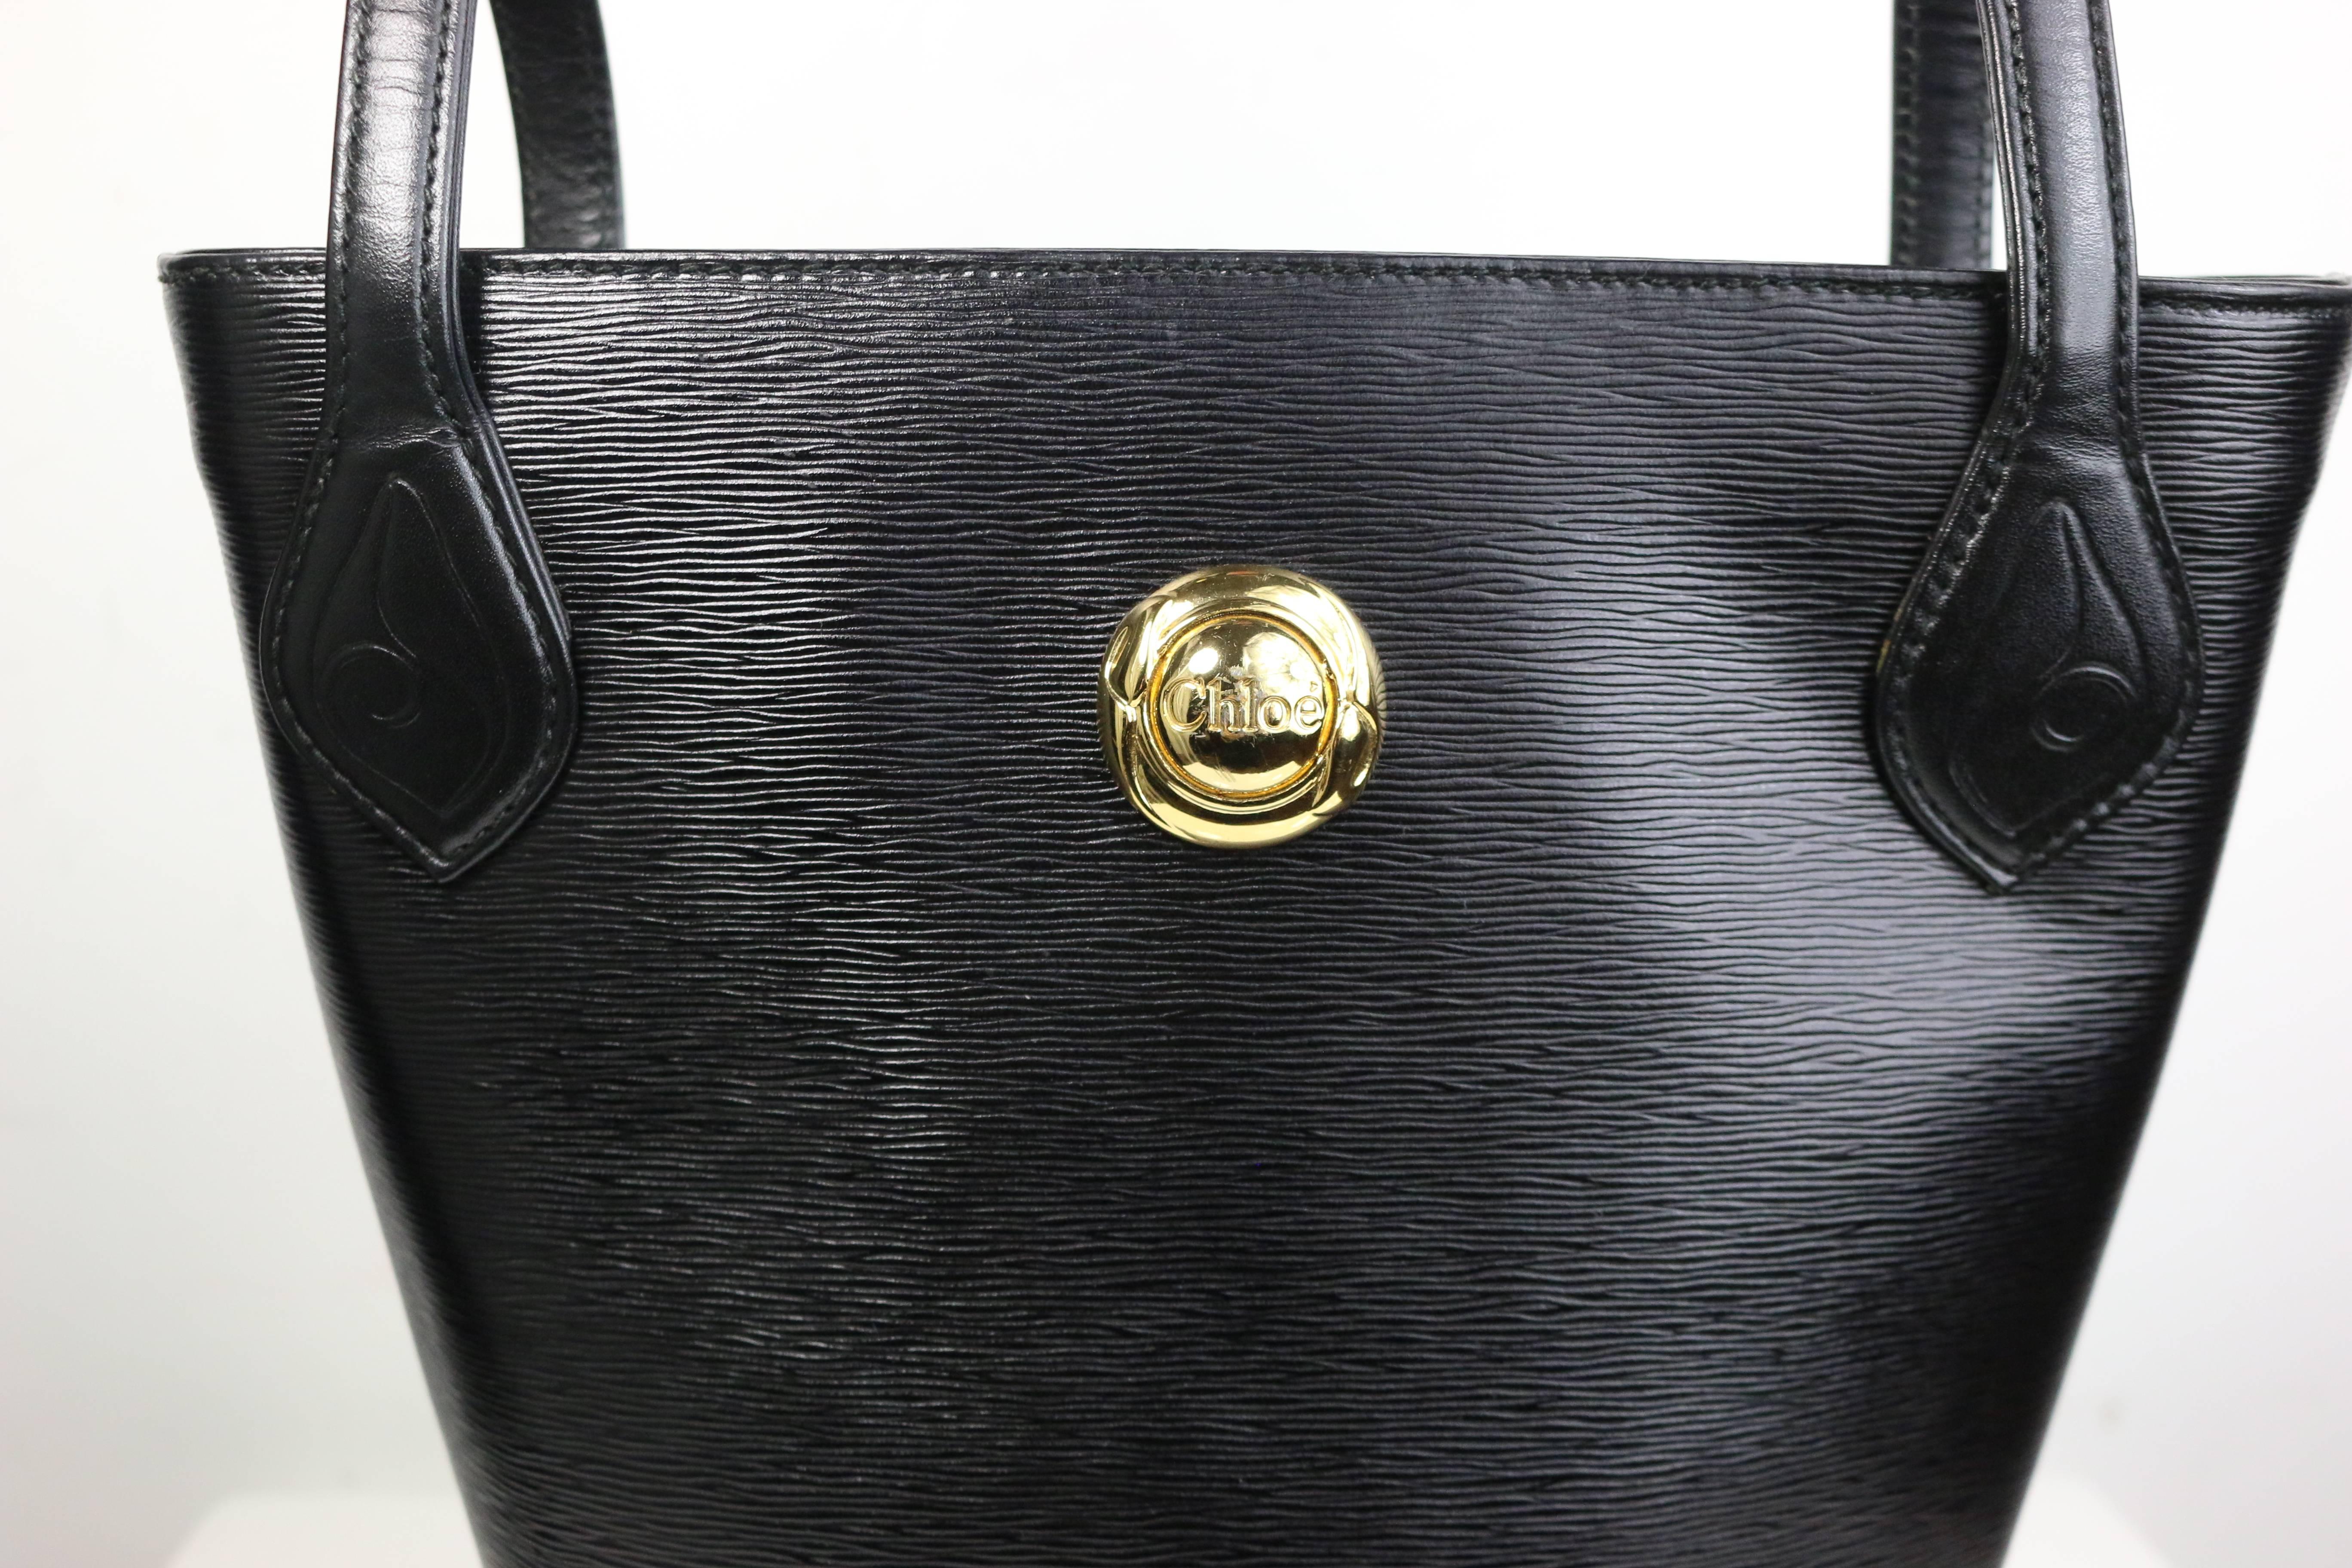 - Vintage 90s Chloe black leather bucket bag with adjustable leather strap. This bag can be worn in shoulders. Featuring an embedded gold toned hardware "Chloe" logo in front, a gold zipper fastening, and the interior has one zipper pocket